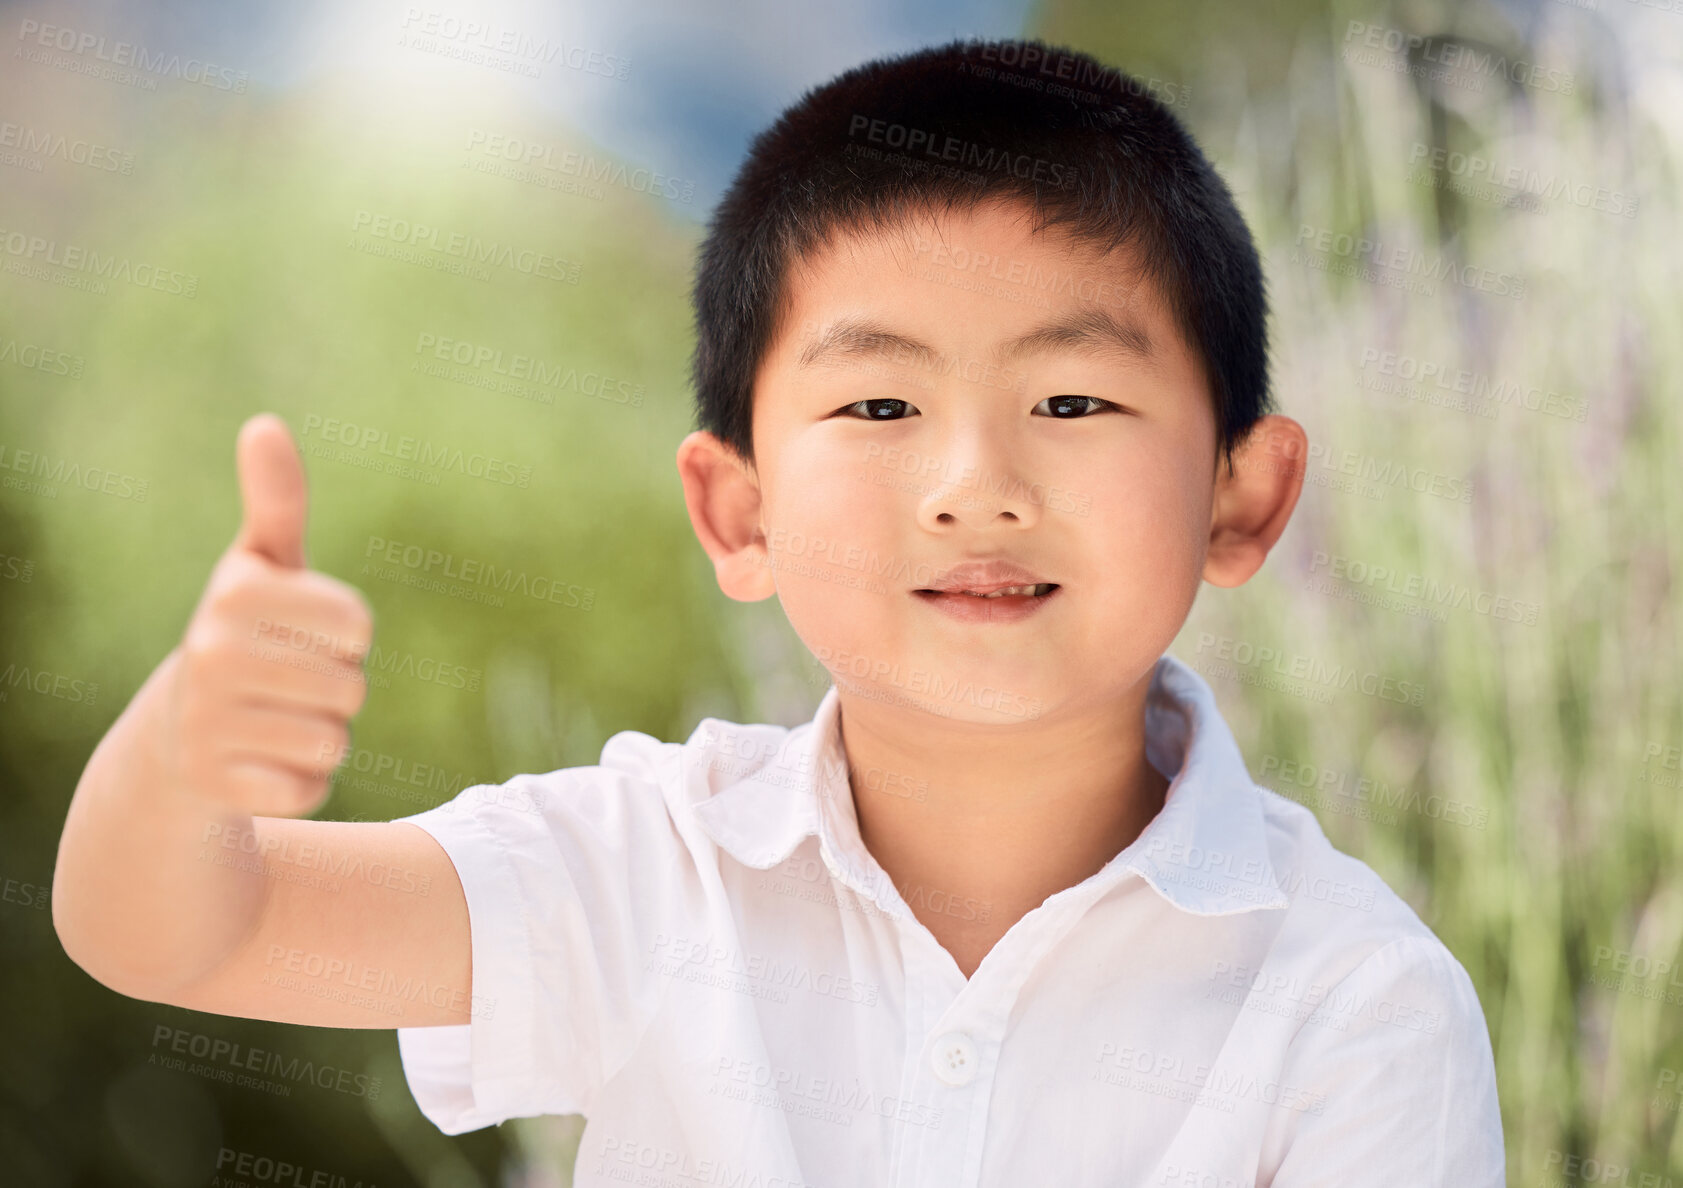 Buy stock photo Shot of a little boy showing thumbs up in a garden